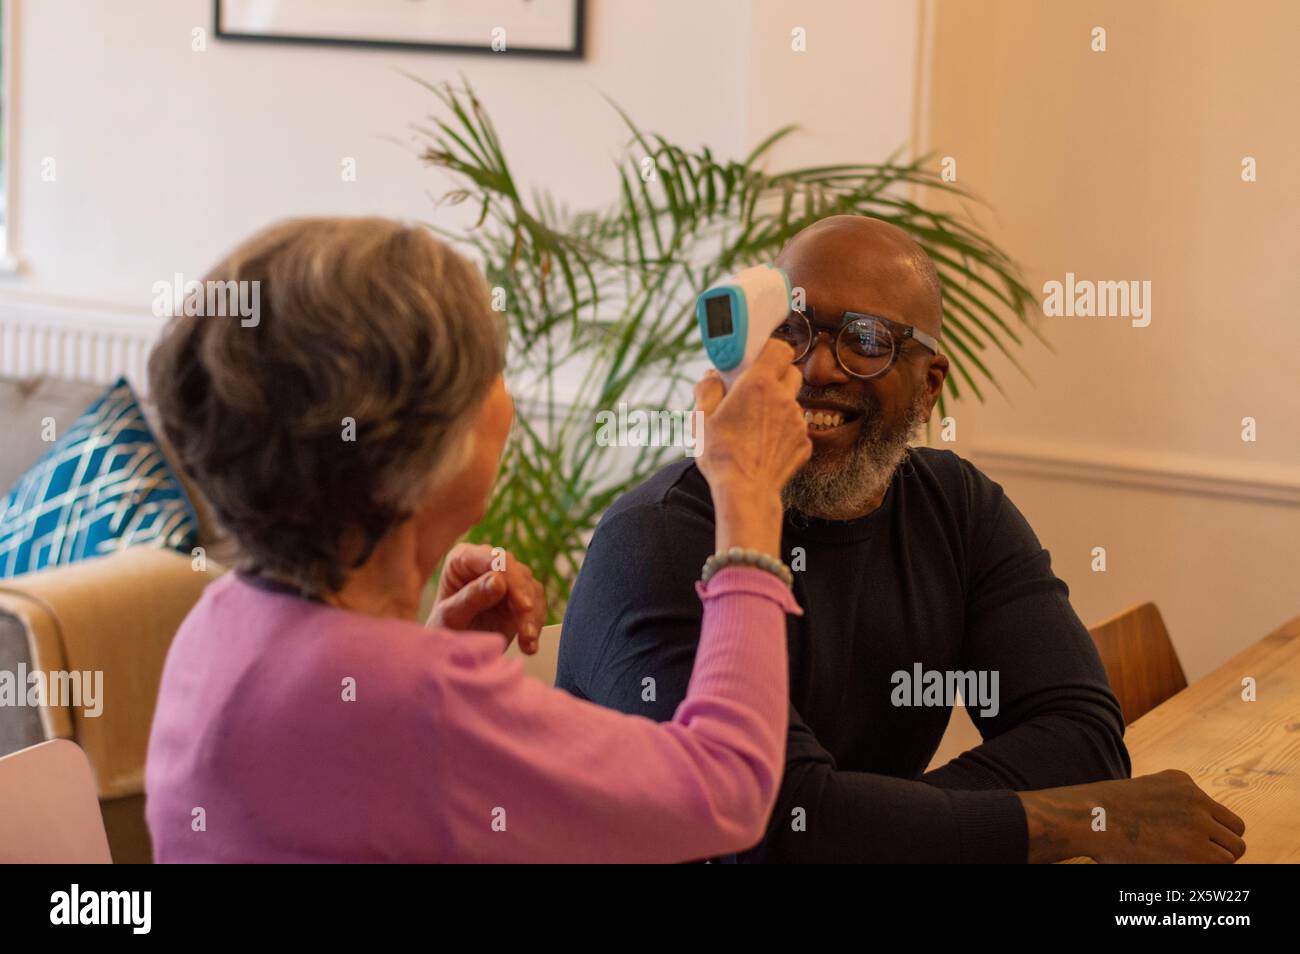 Woman measuring mans temperature at home Stock Photo